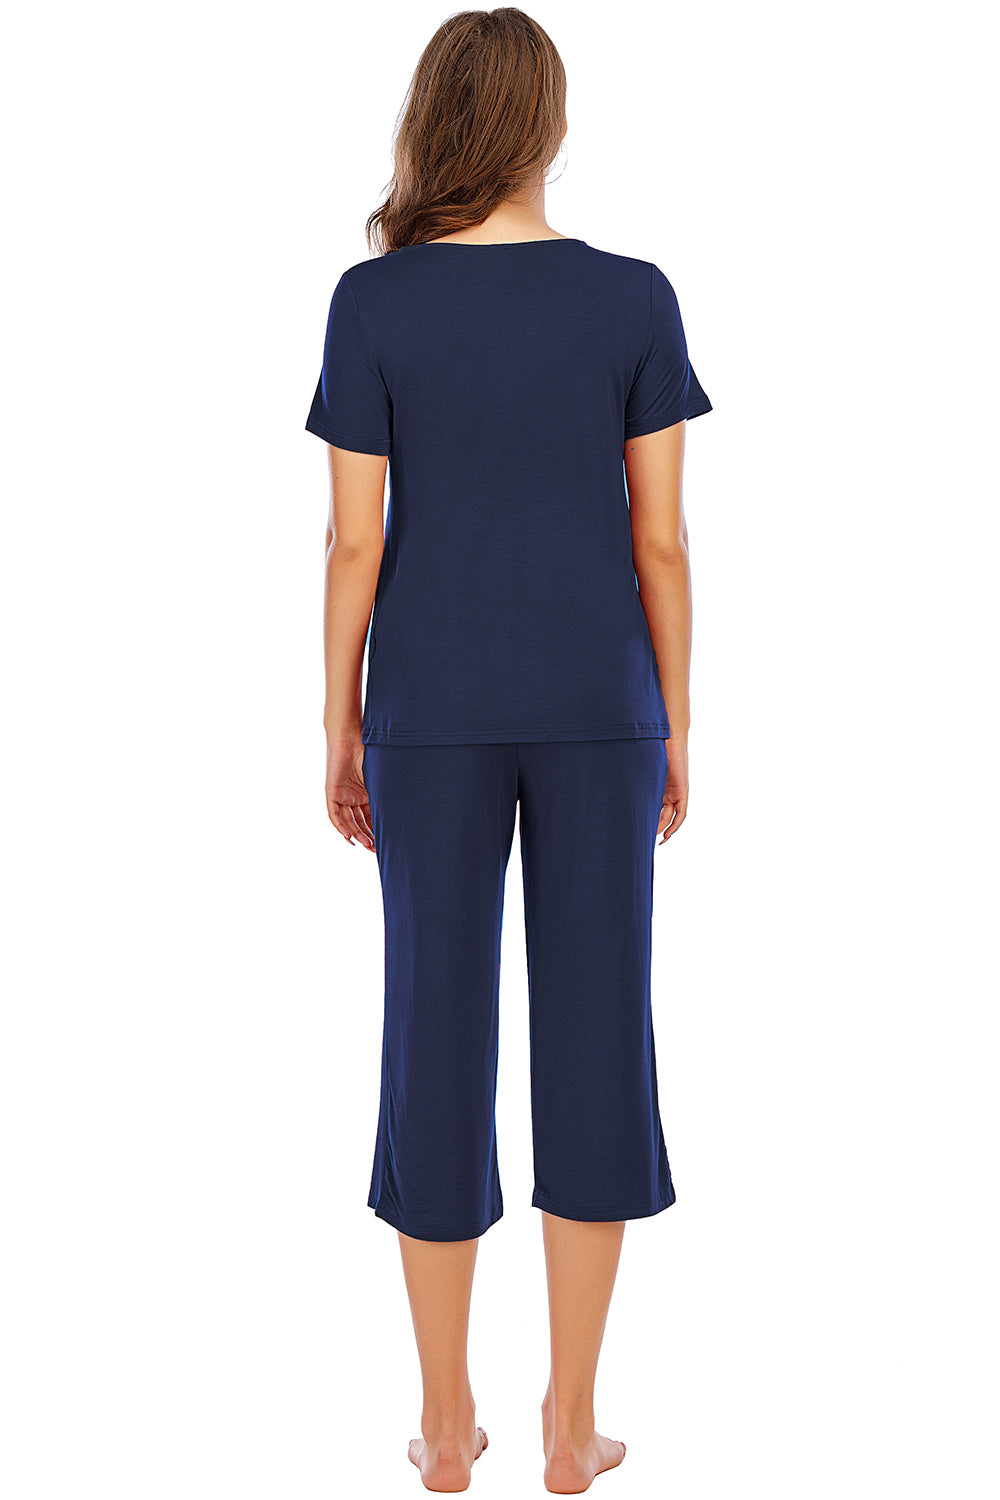 Cozy yet chic V-Neck Lounge Set perfect for relaxing at home or casual outings. Supreme comfort meets effortless style.